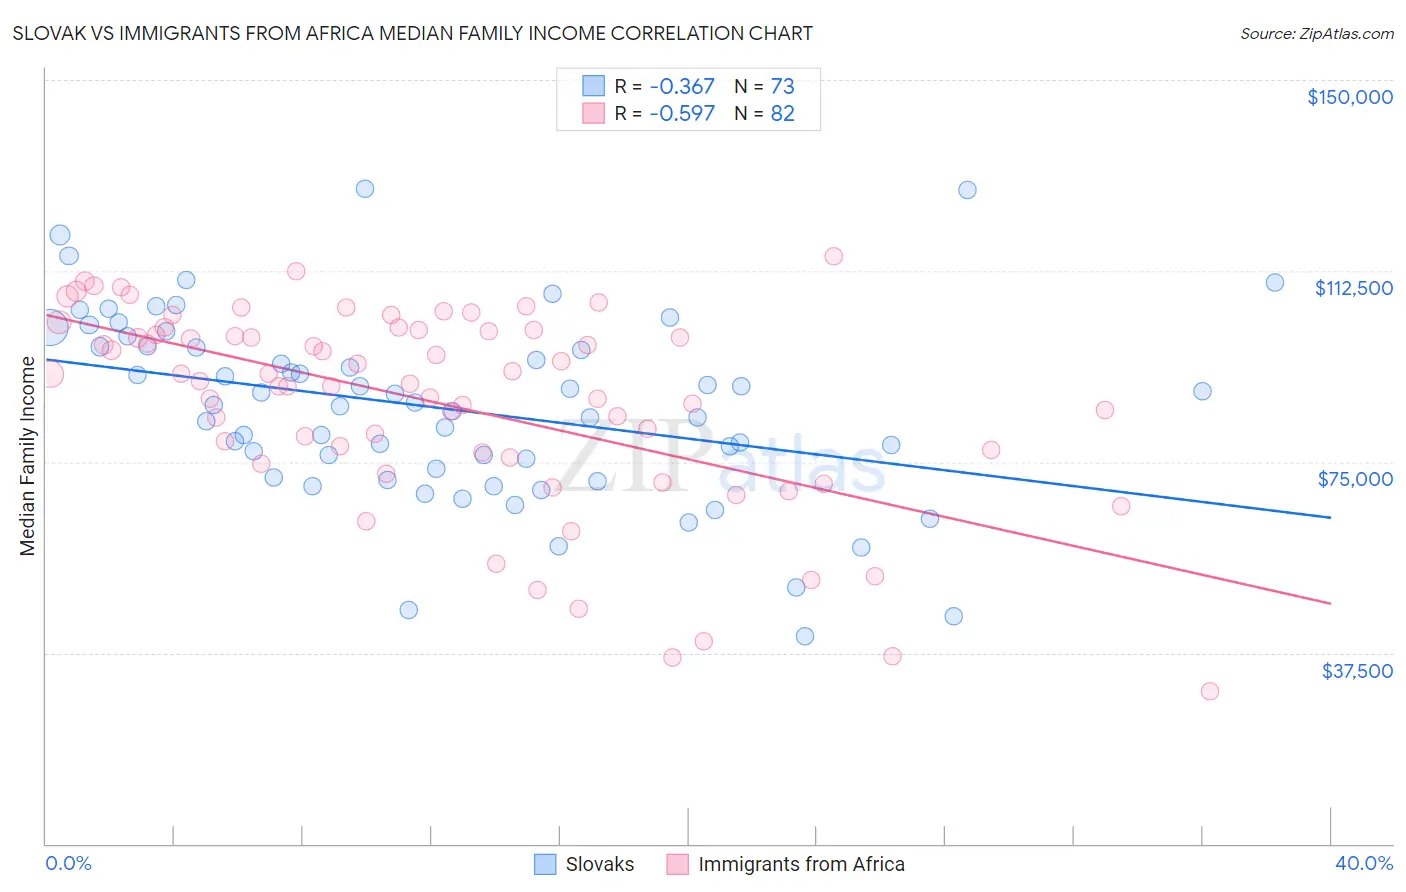 Slovak vs Immigrants from Africa Median Family Income